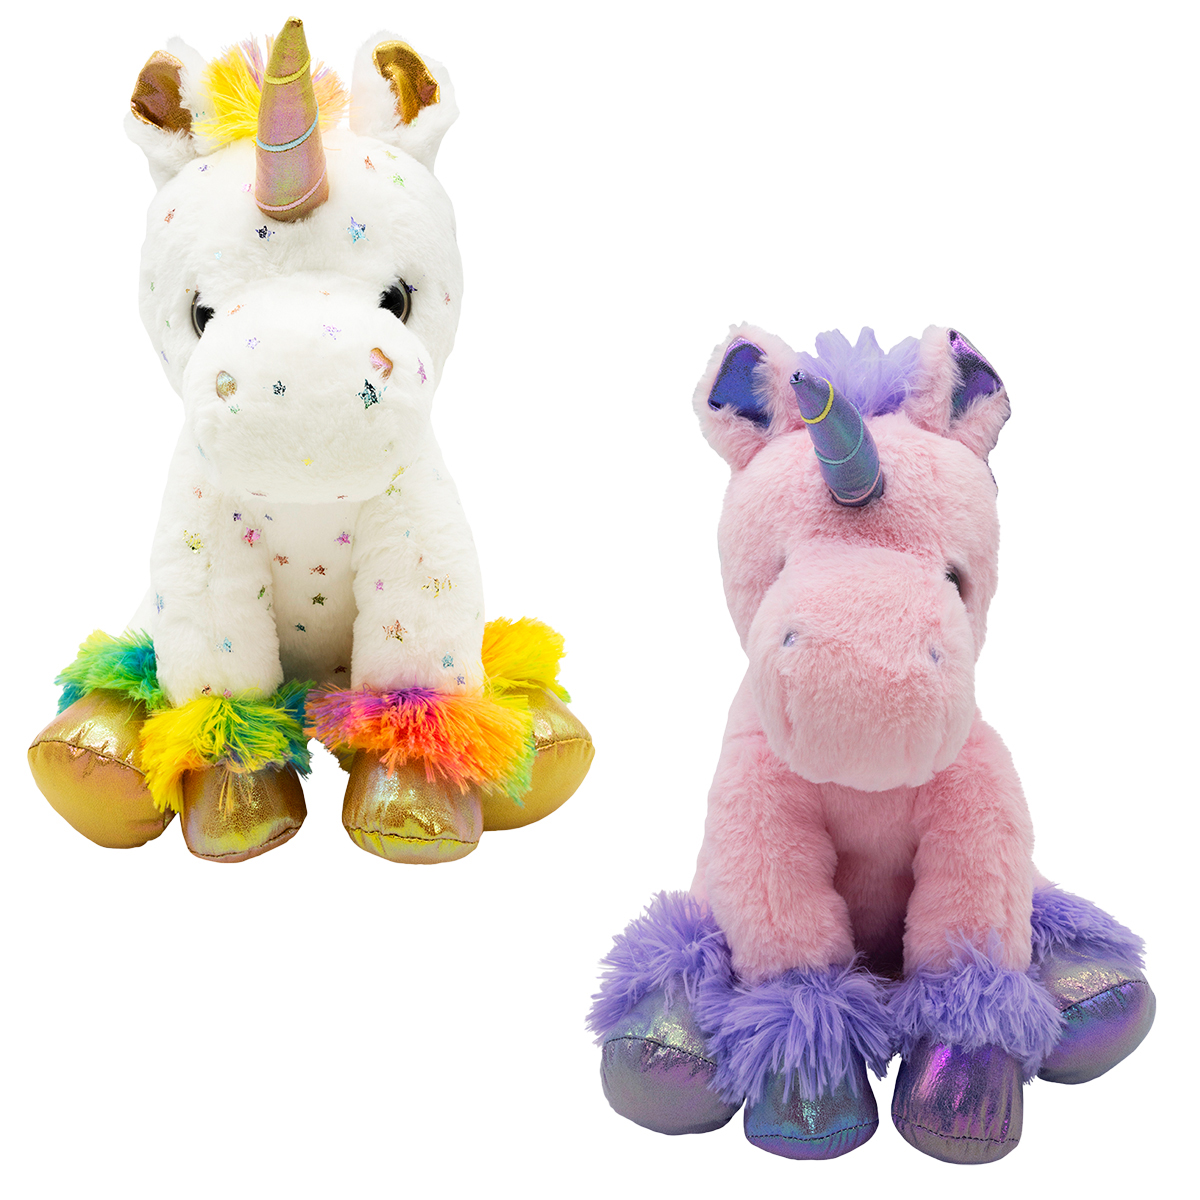 Treasure Cove K19169135 Plush 13.5-Inch Unicorn Stuffed Toy Mythical Critter Gift Playtime Assorted